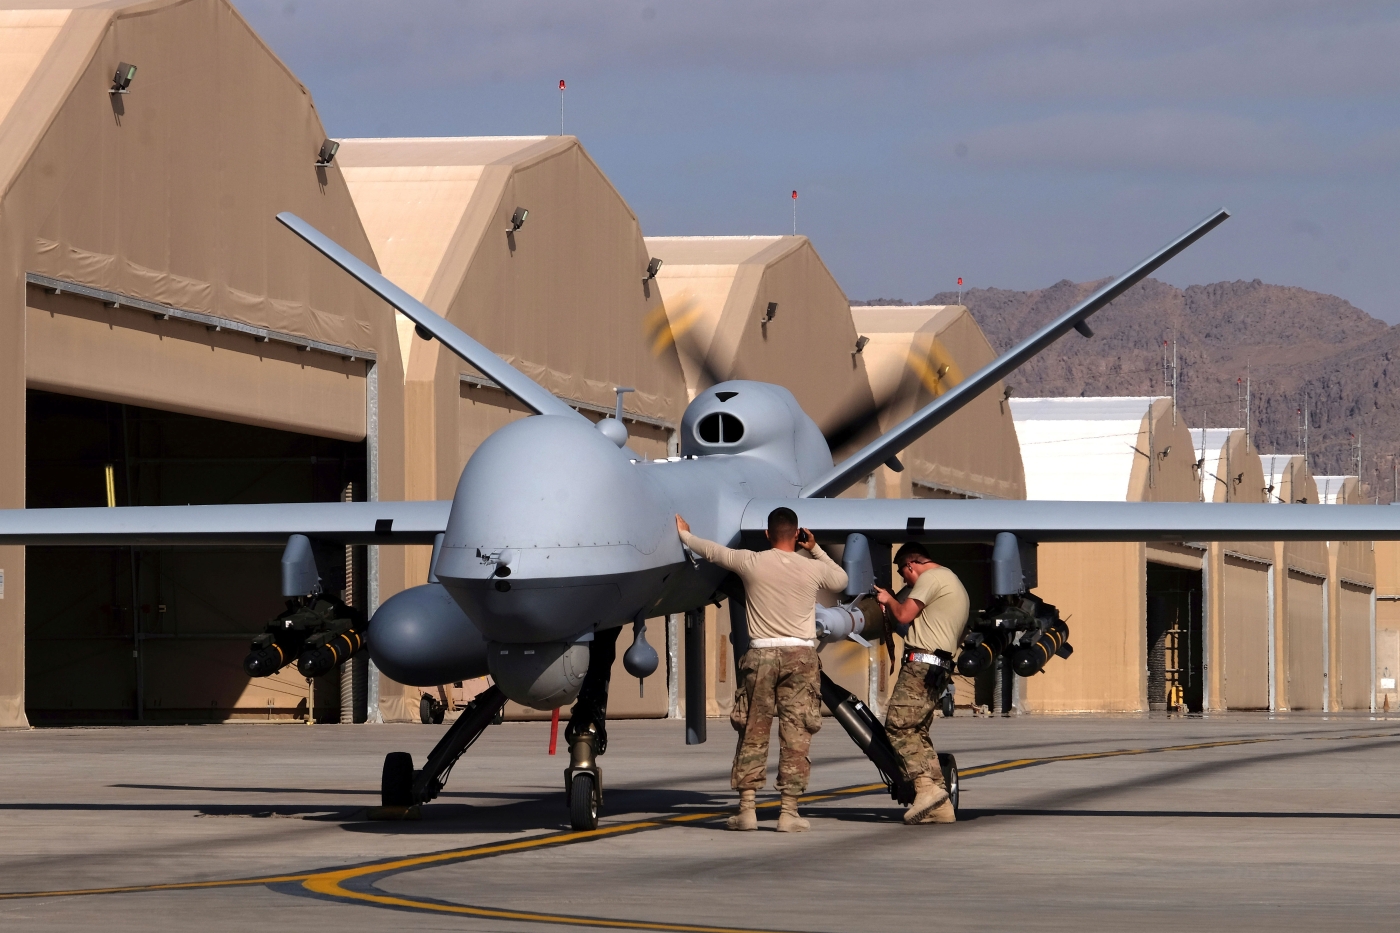 The armed MQ-9B drones will be equipped with maritime radar and could be delivered in 2024.